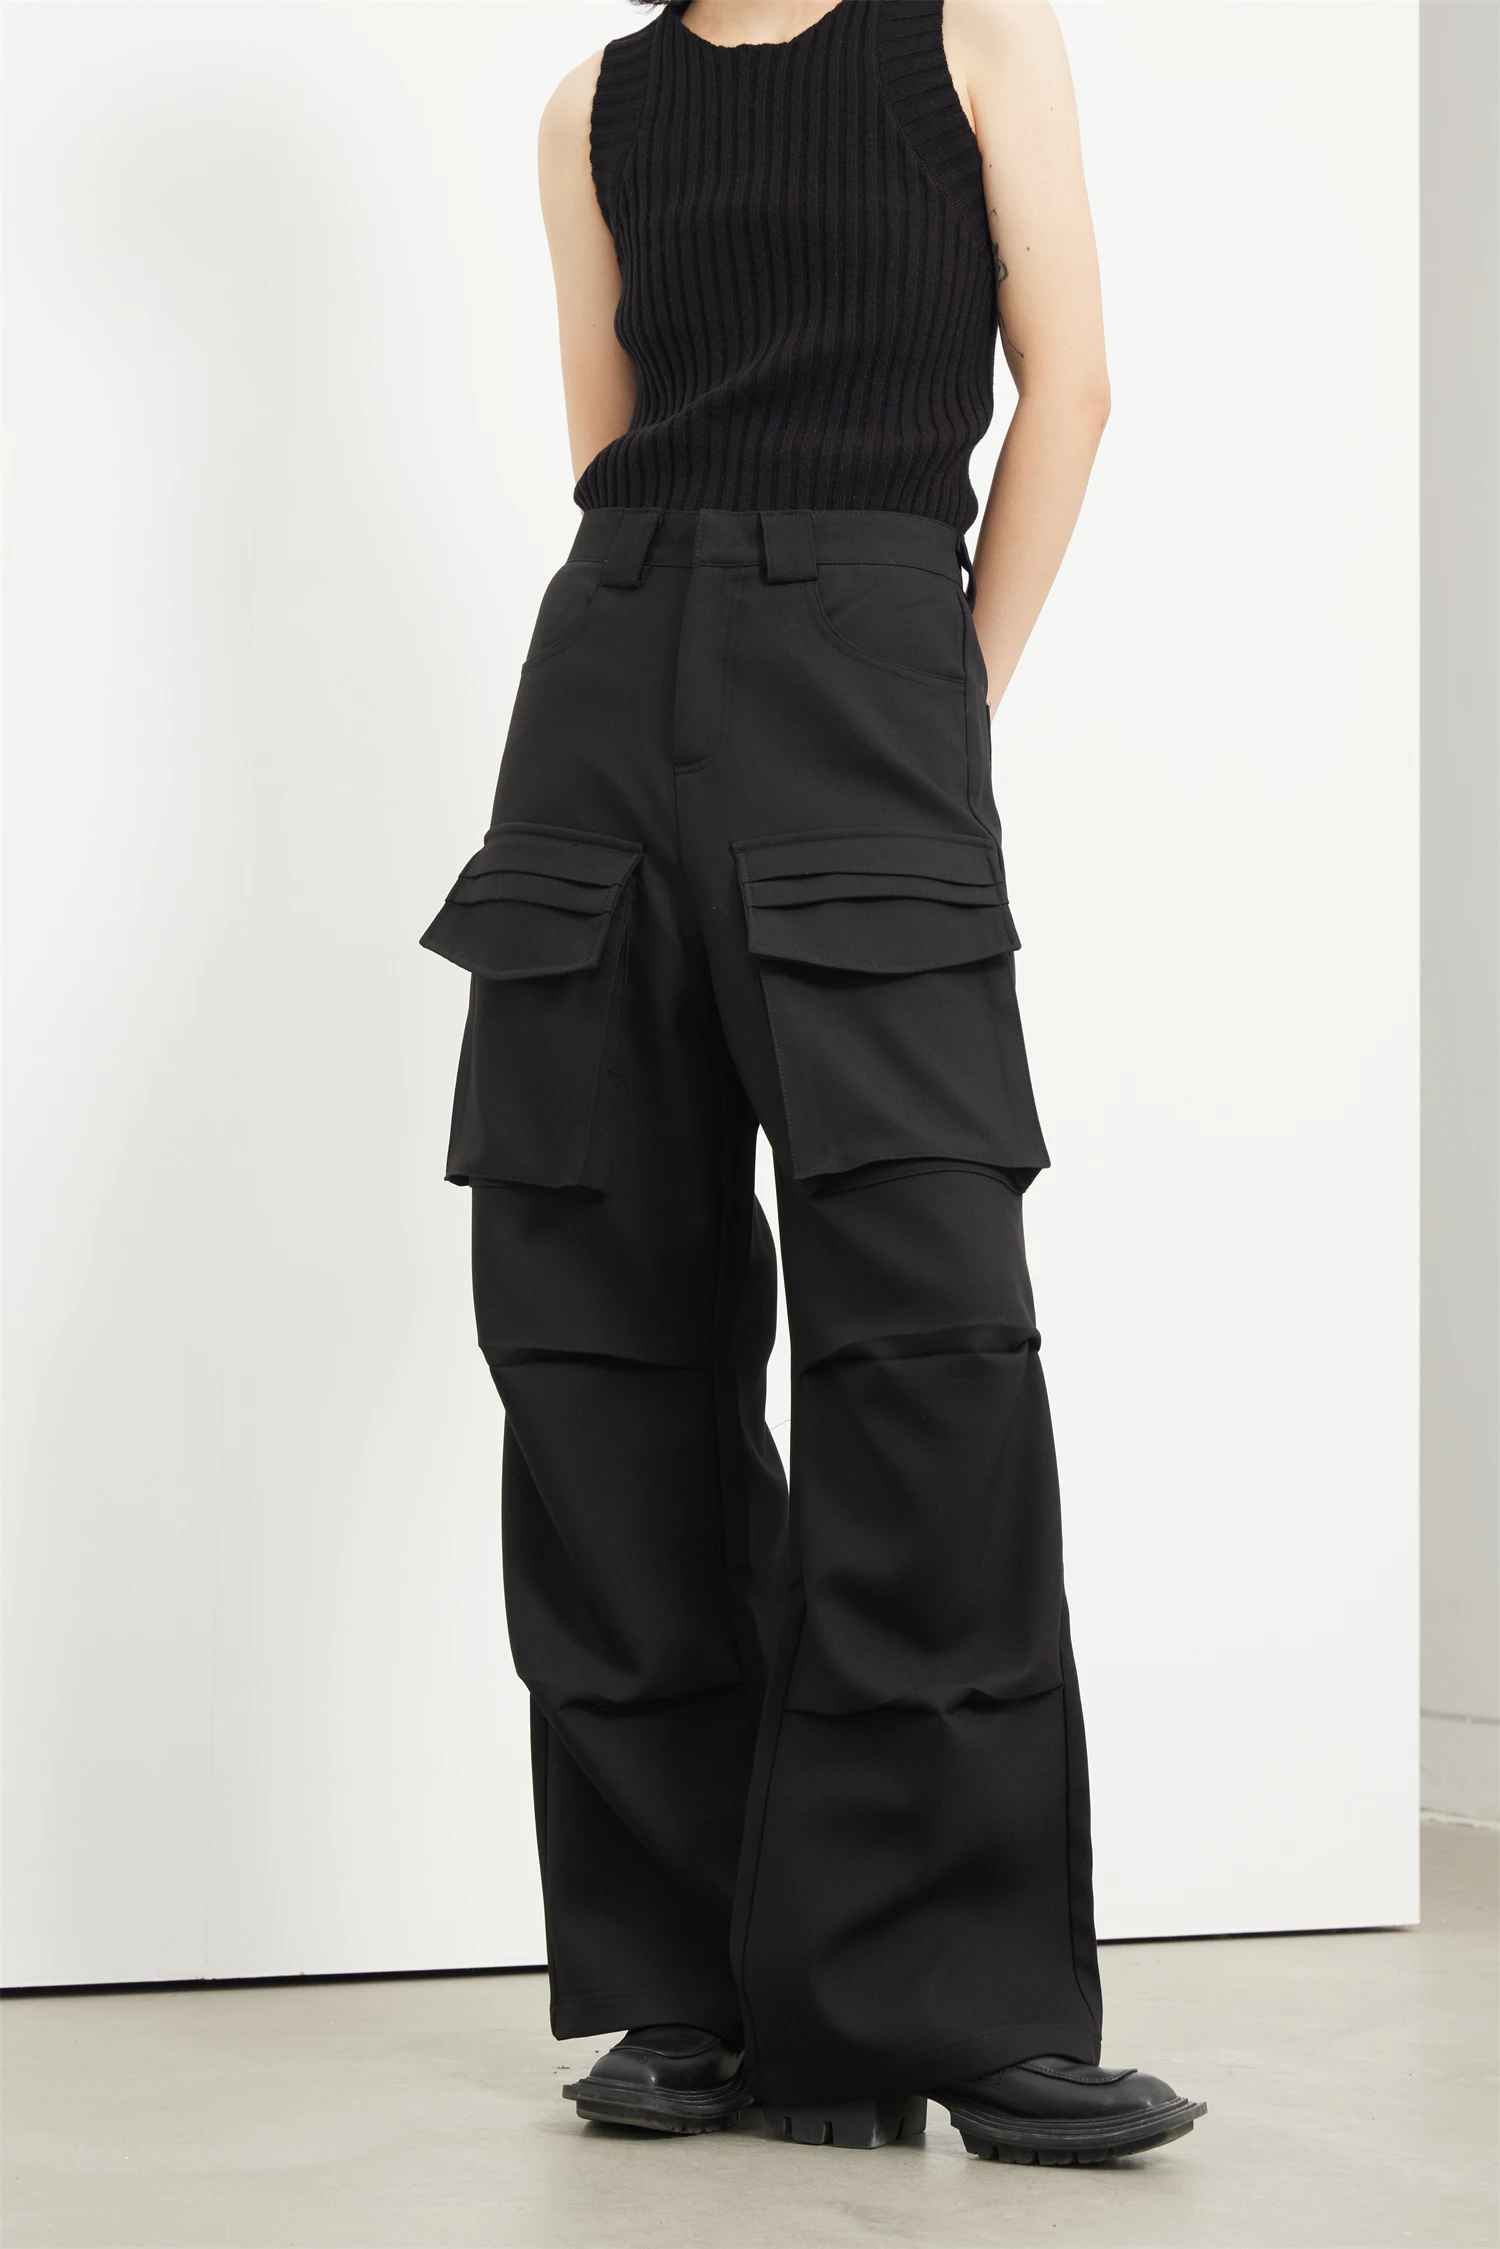 Dark street casual pumping pleated multi-pocket long leg straight large size overalls